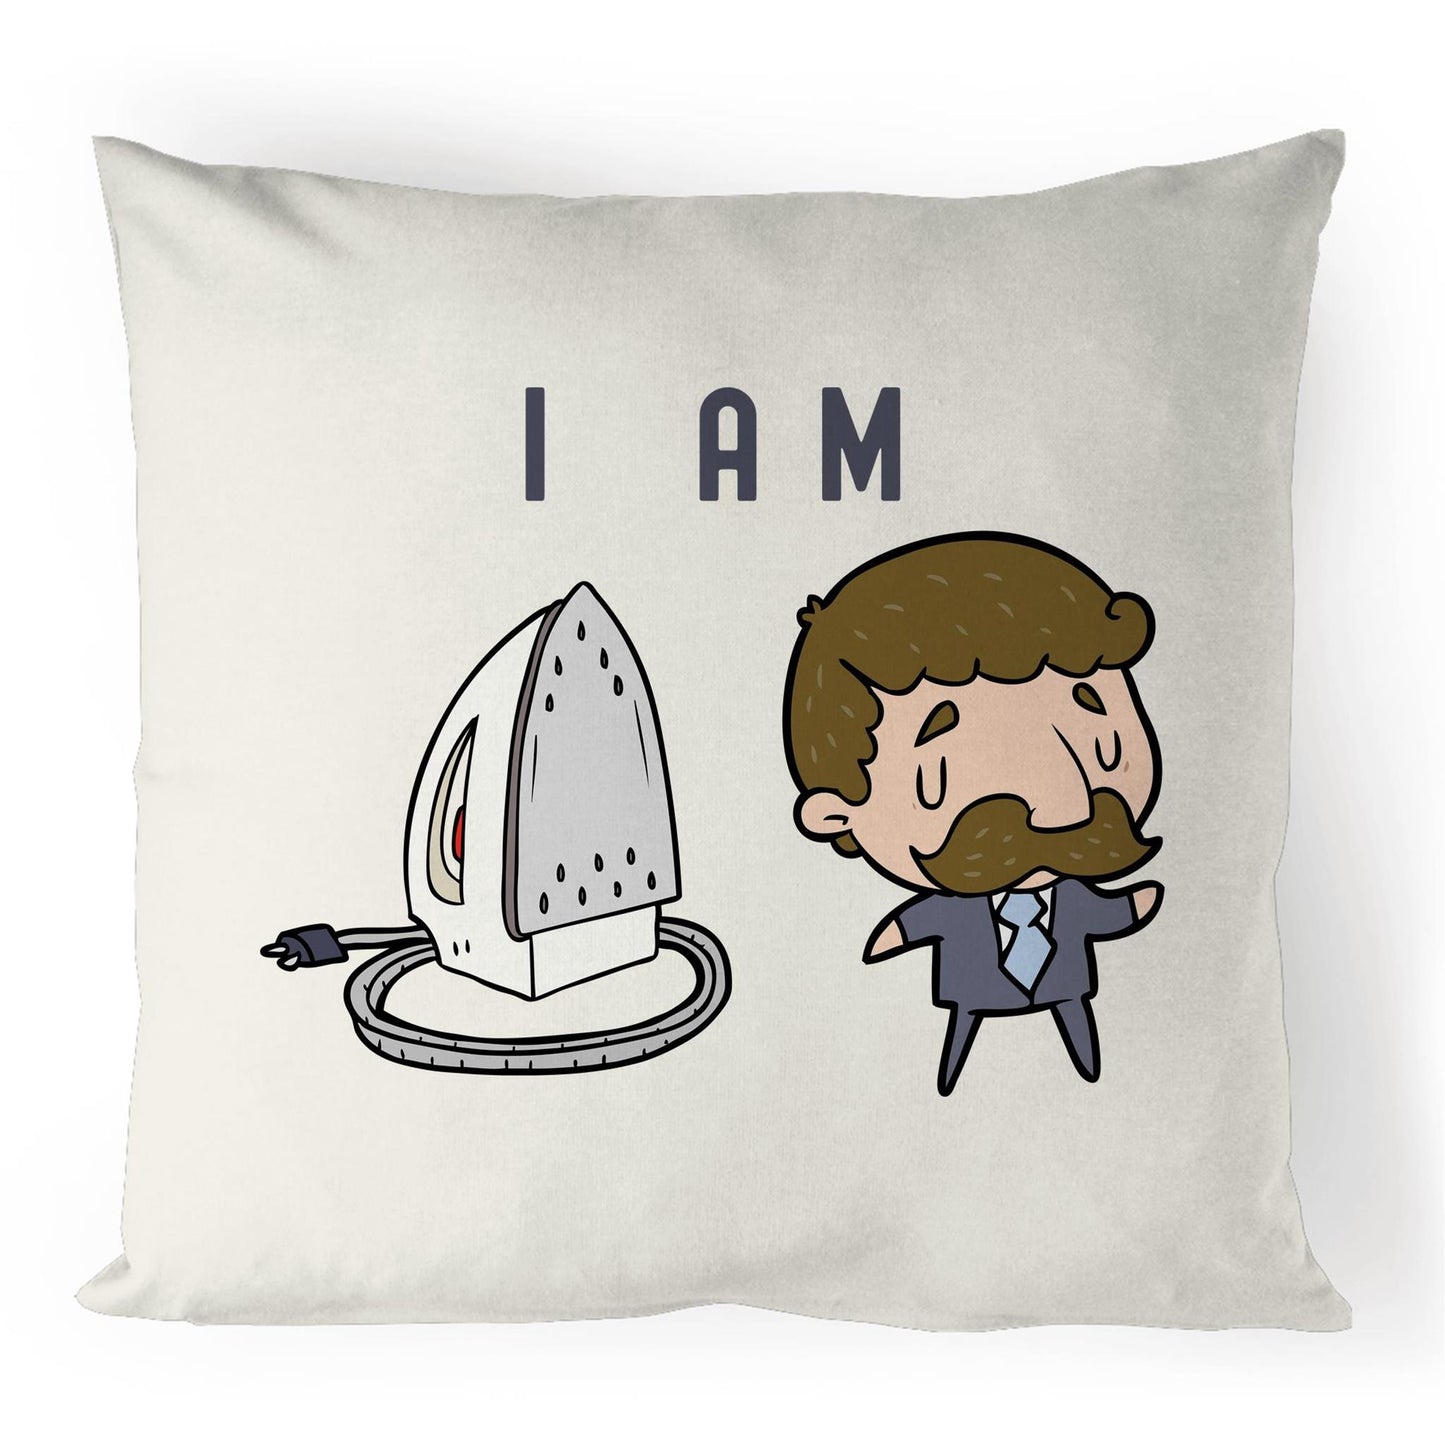 I Am Ironing Man Cartoon - 100% Linen Cushion Cover Natural One-Size Linen Cushion Cover comic Funny